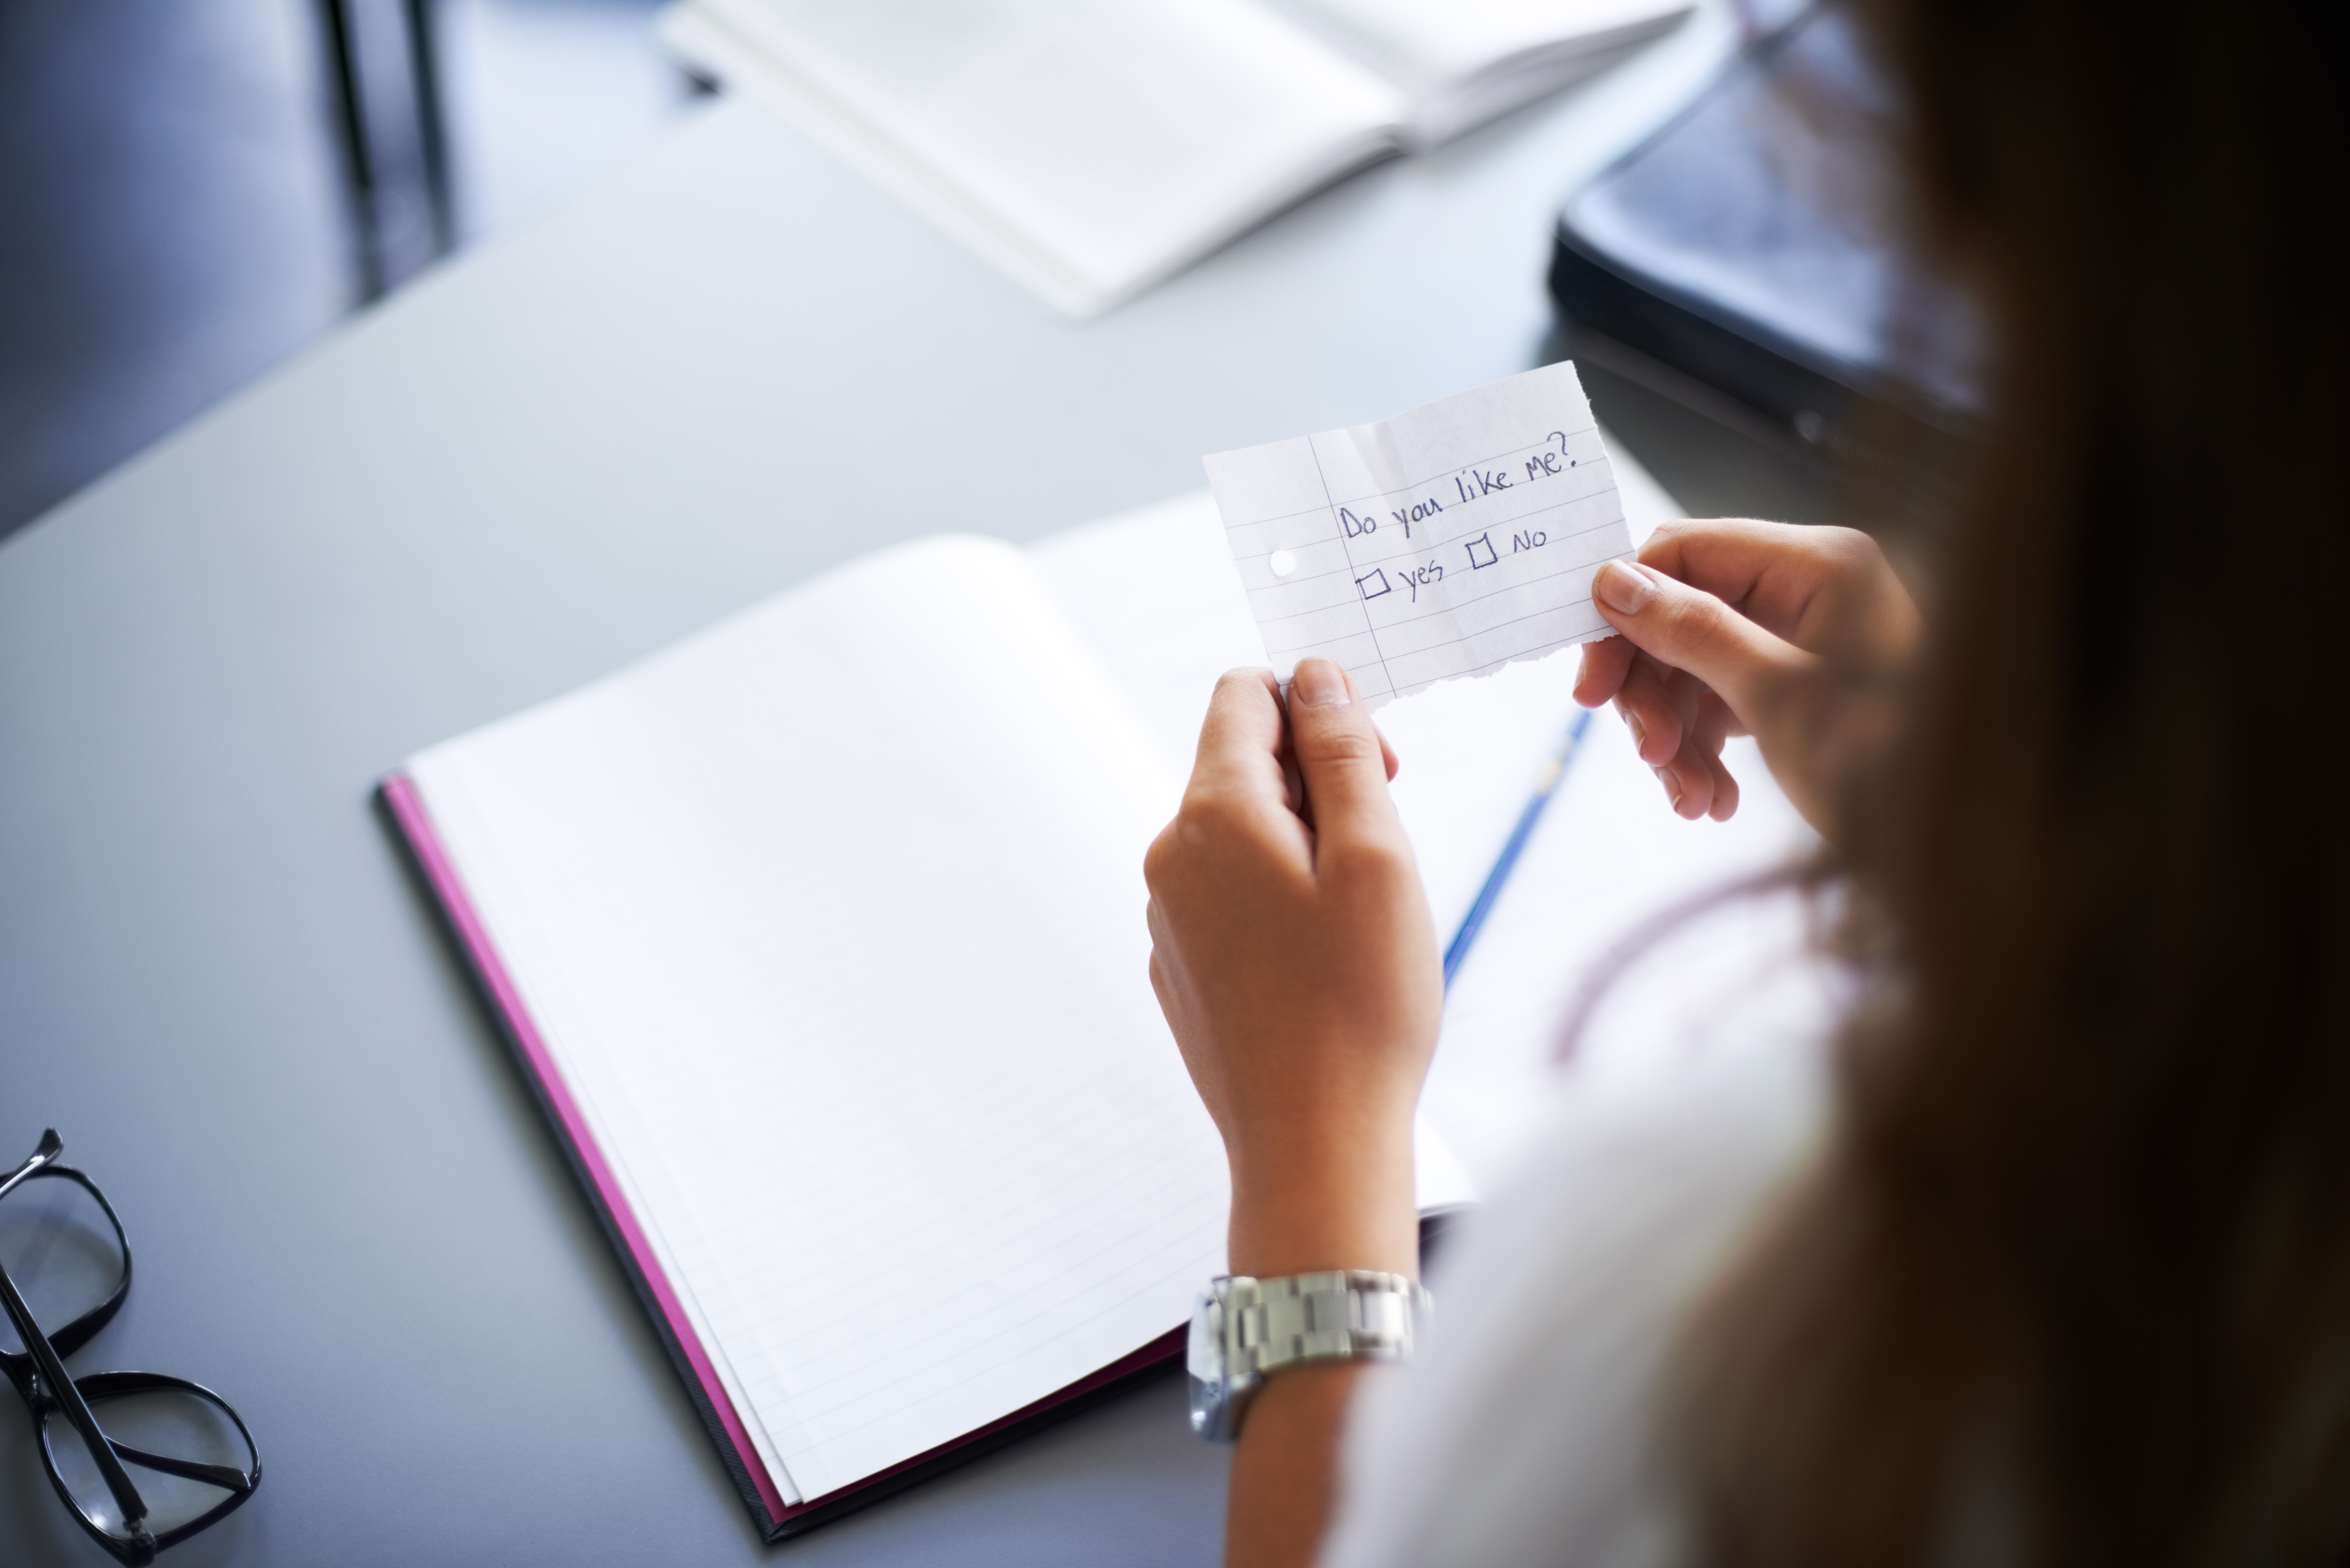 How To Write Secret Admirer Notes And What To Say